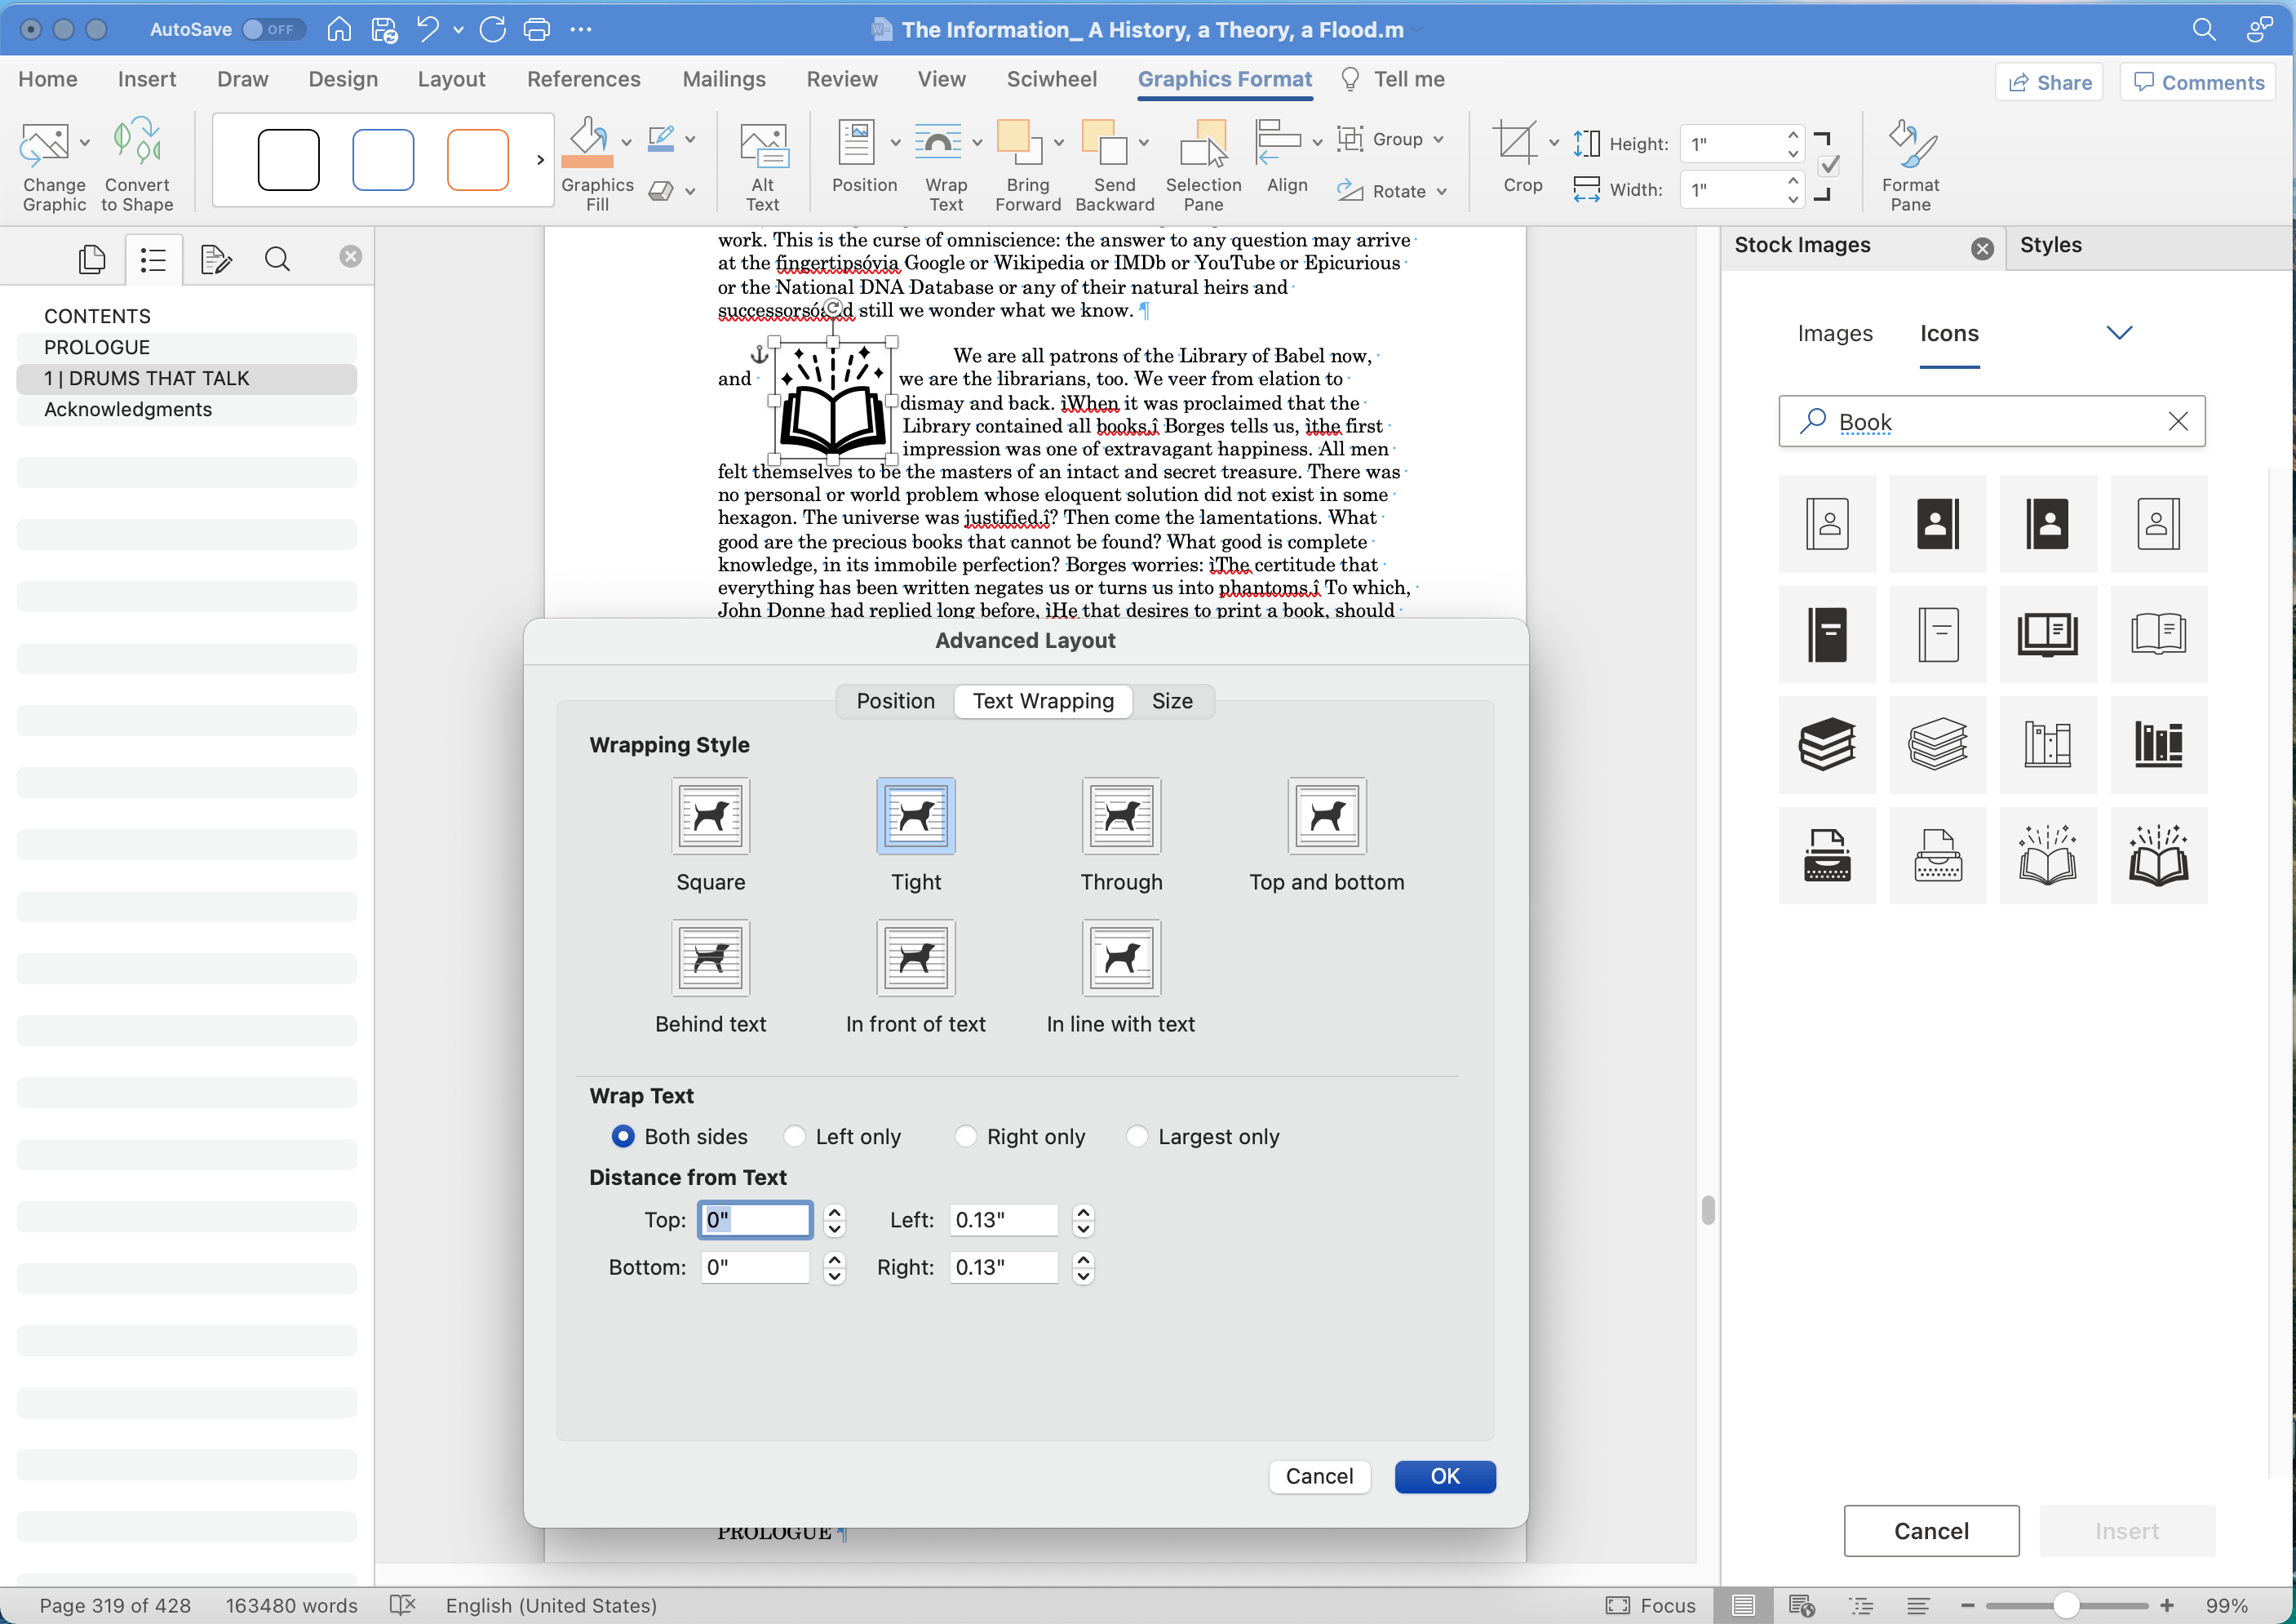 [MSWord 365 showing icon image inserted wrapped mac]